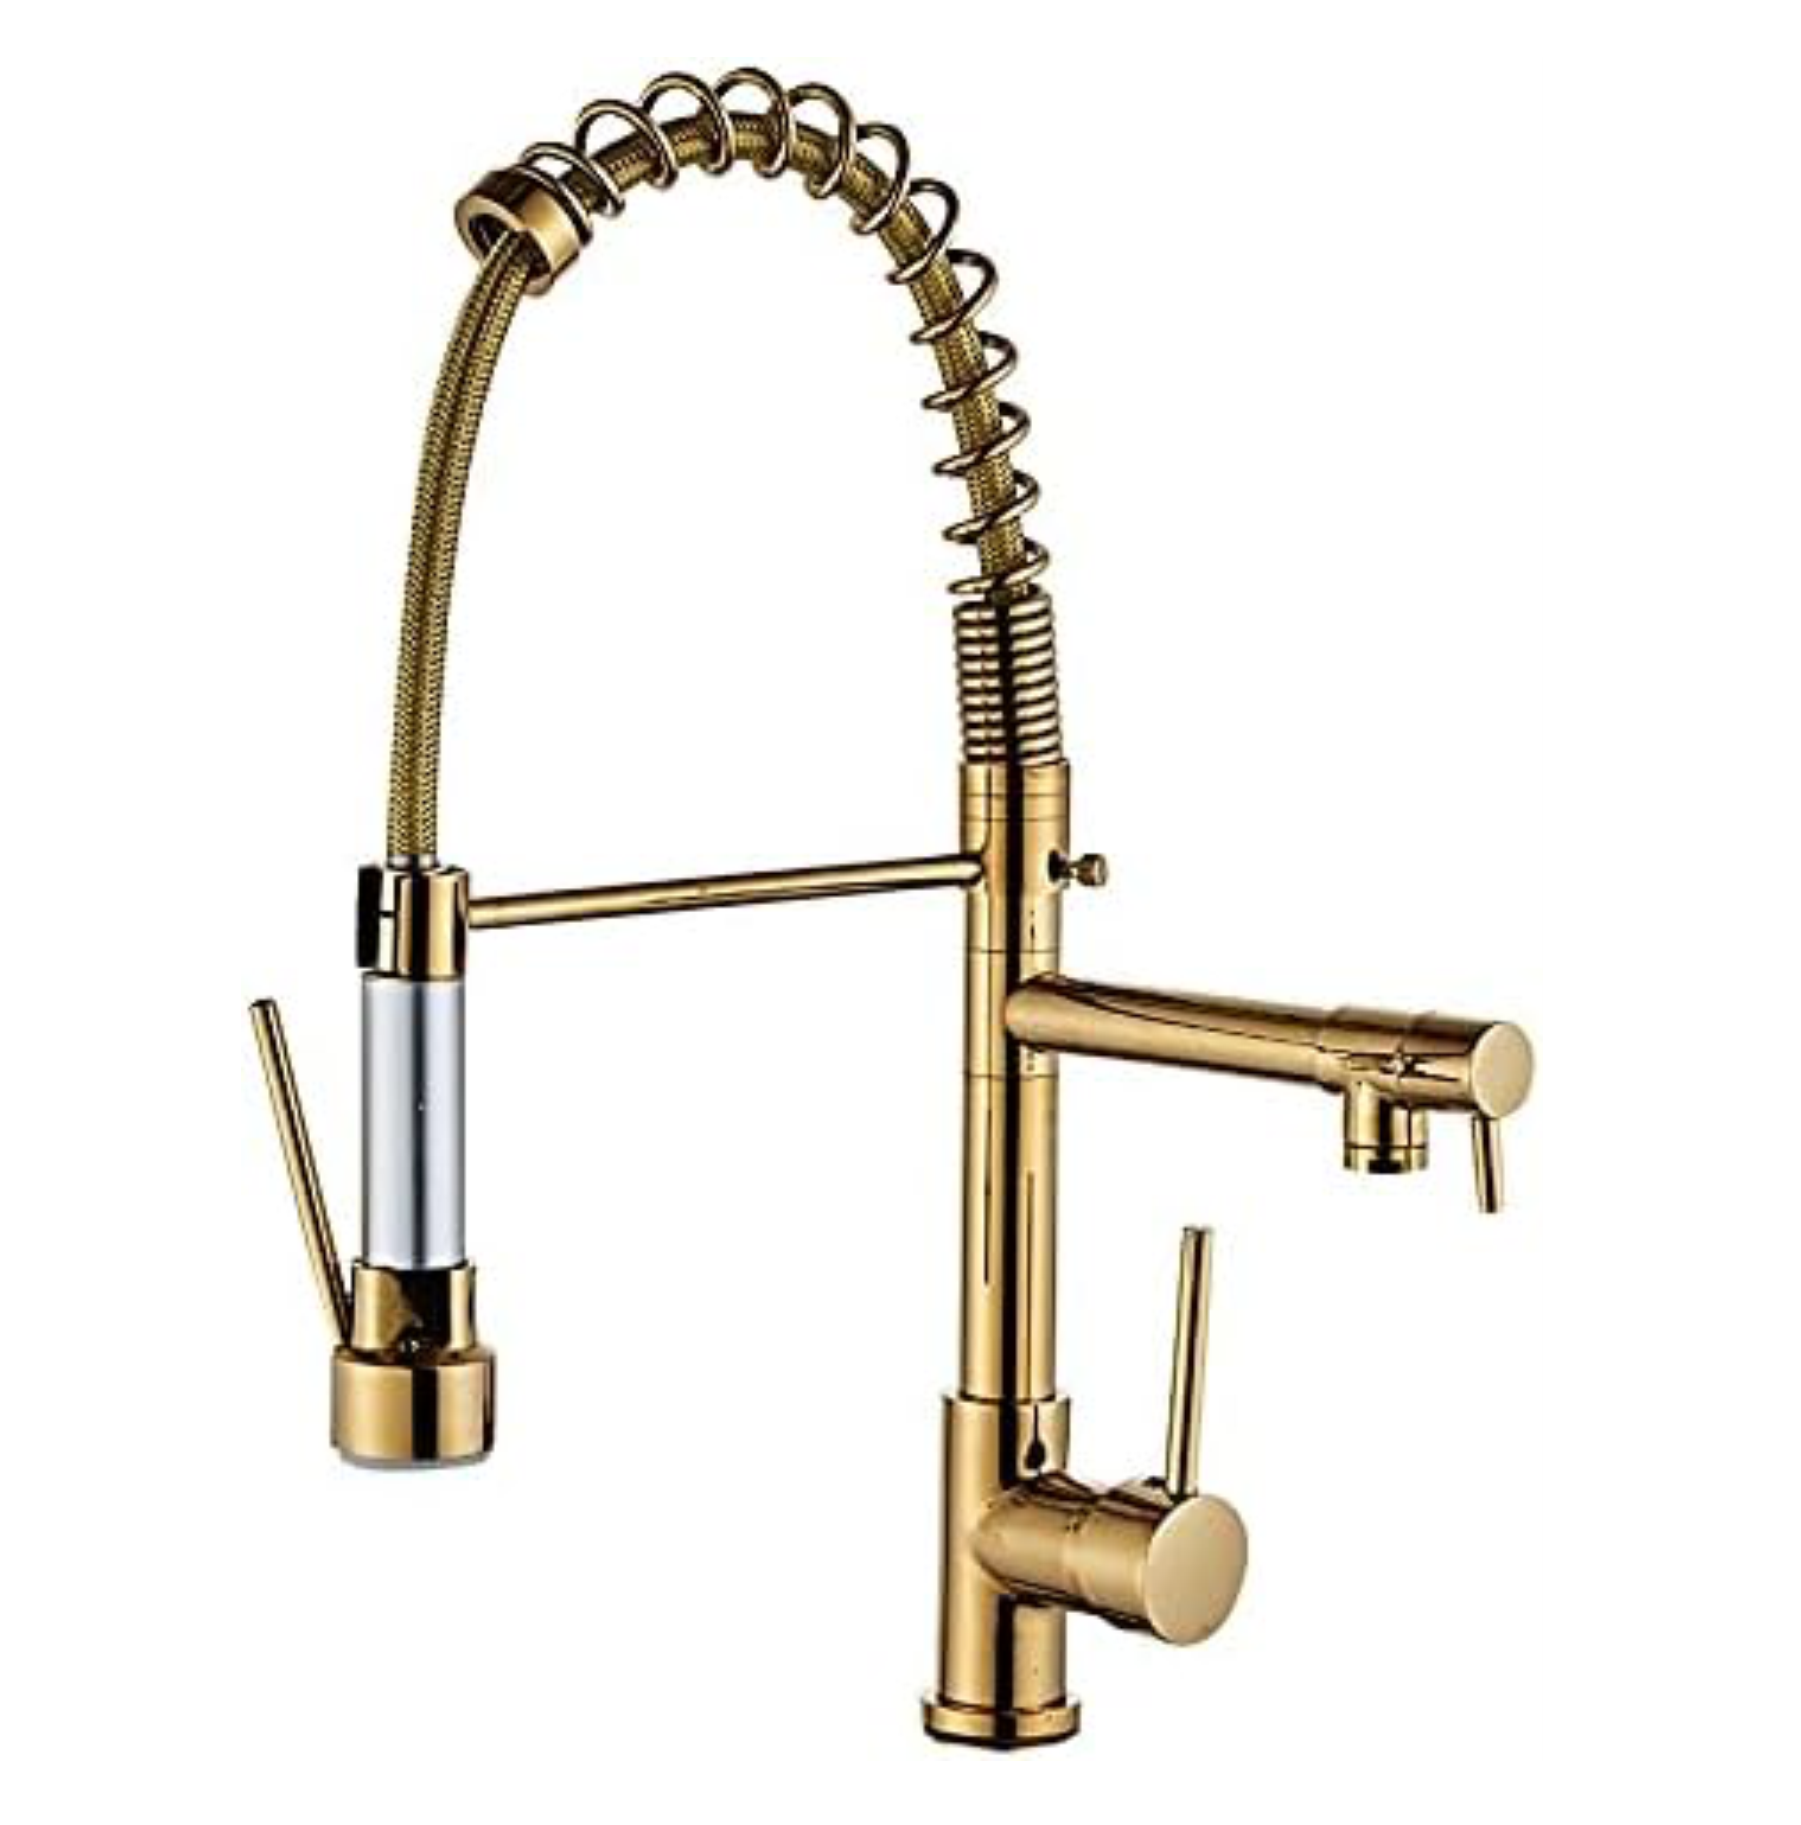 Kitchen Tap Kitchen Faucet Brushed Nickel Pull Down Kitchen Tap Single Handle 360 Degree Rotating Cold Hot Water Mixer Sink Taps Chrome (Gold) Fossa Home